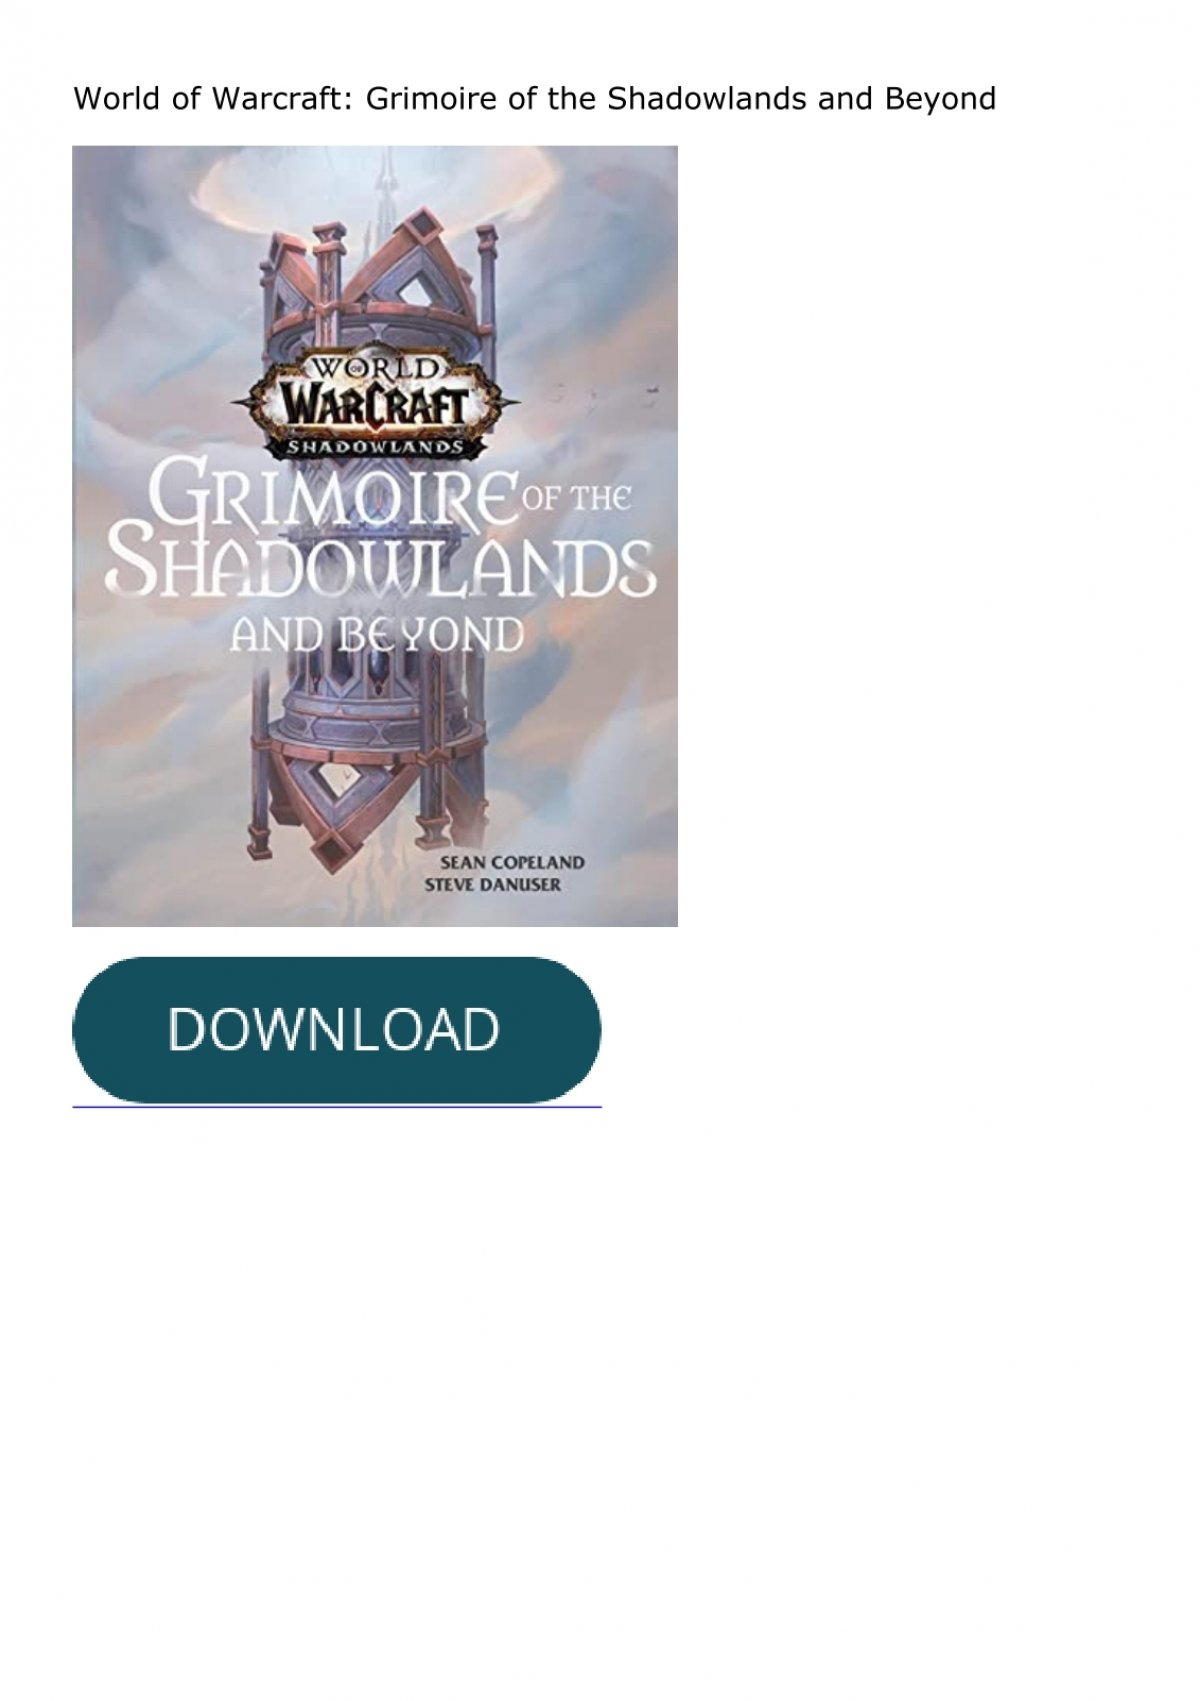 World of Warcraft Shadowlands: Grimoire of the Shadowlands and Beyond